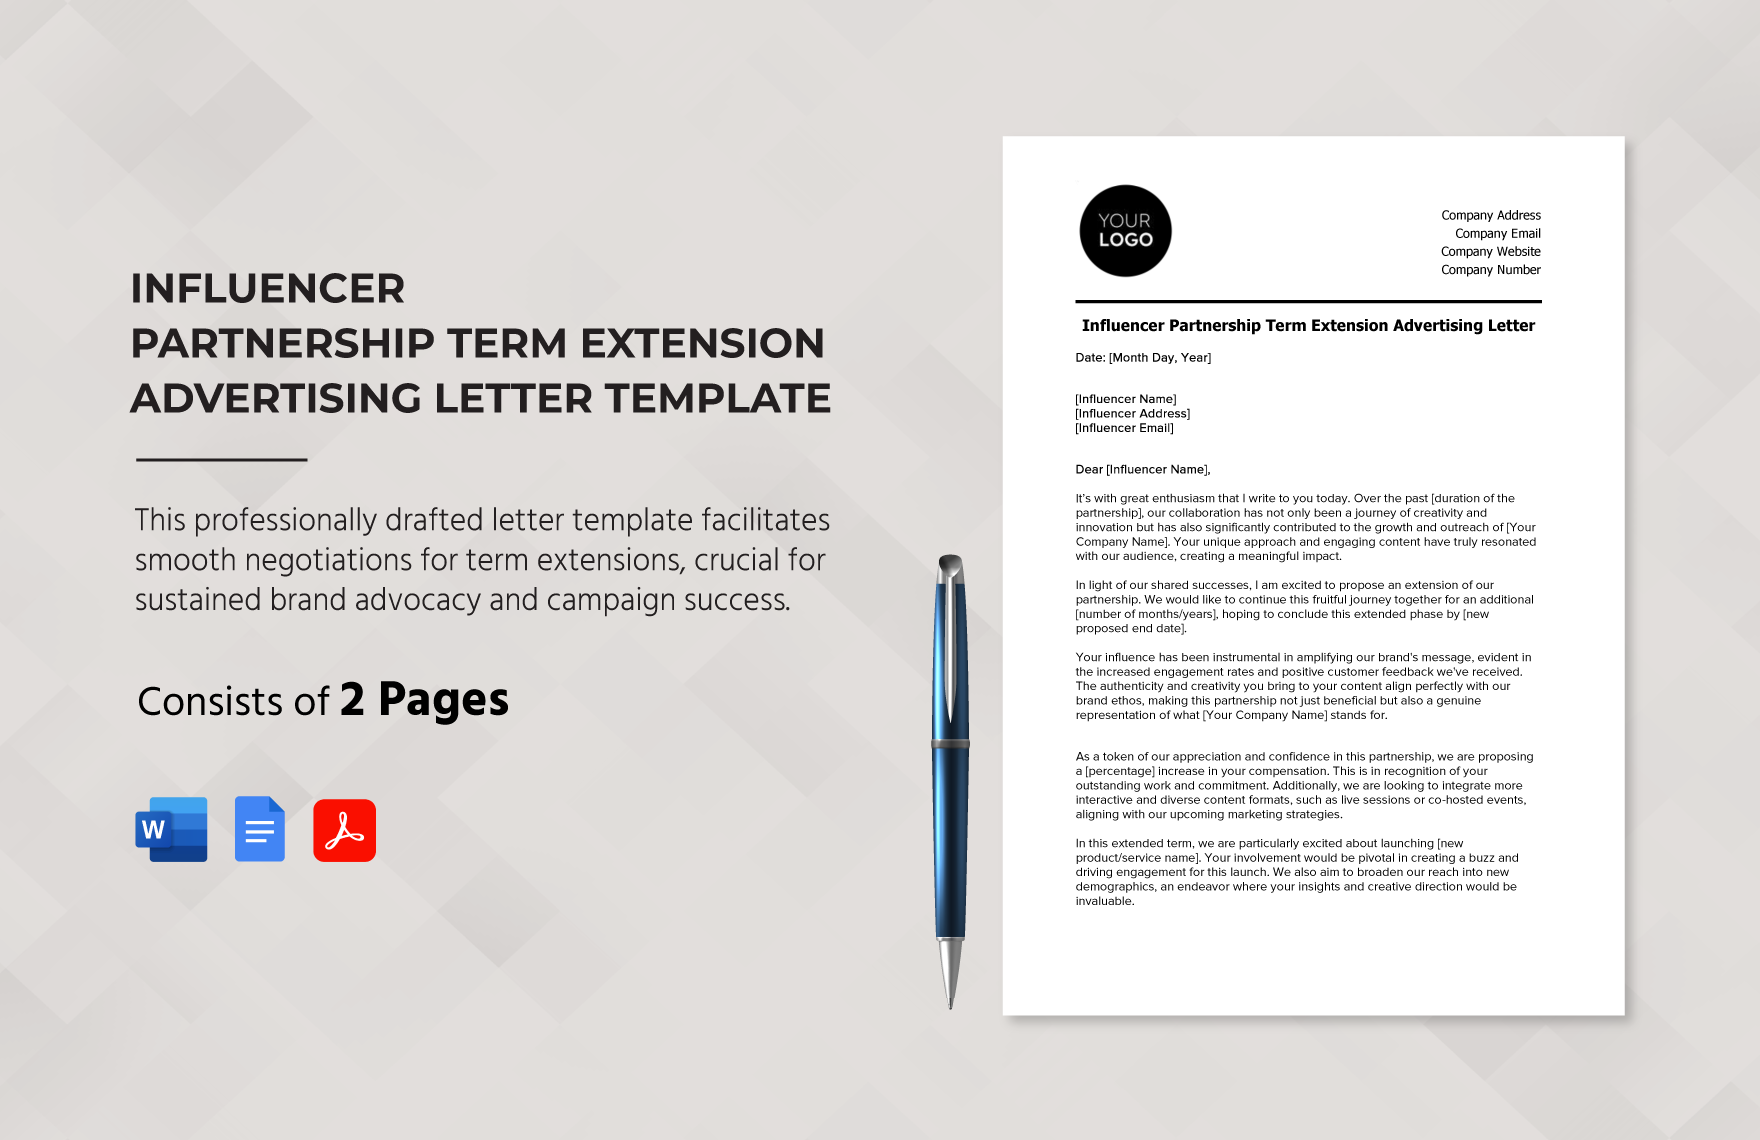 Influencer Partnership Term Extension Advertising Letter Template